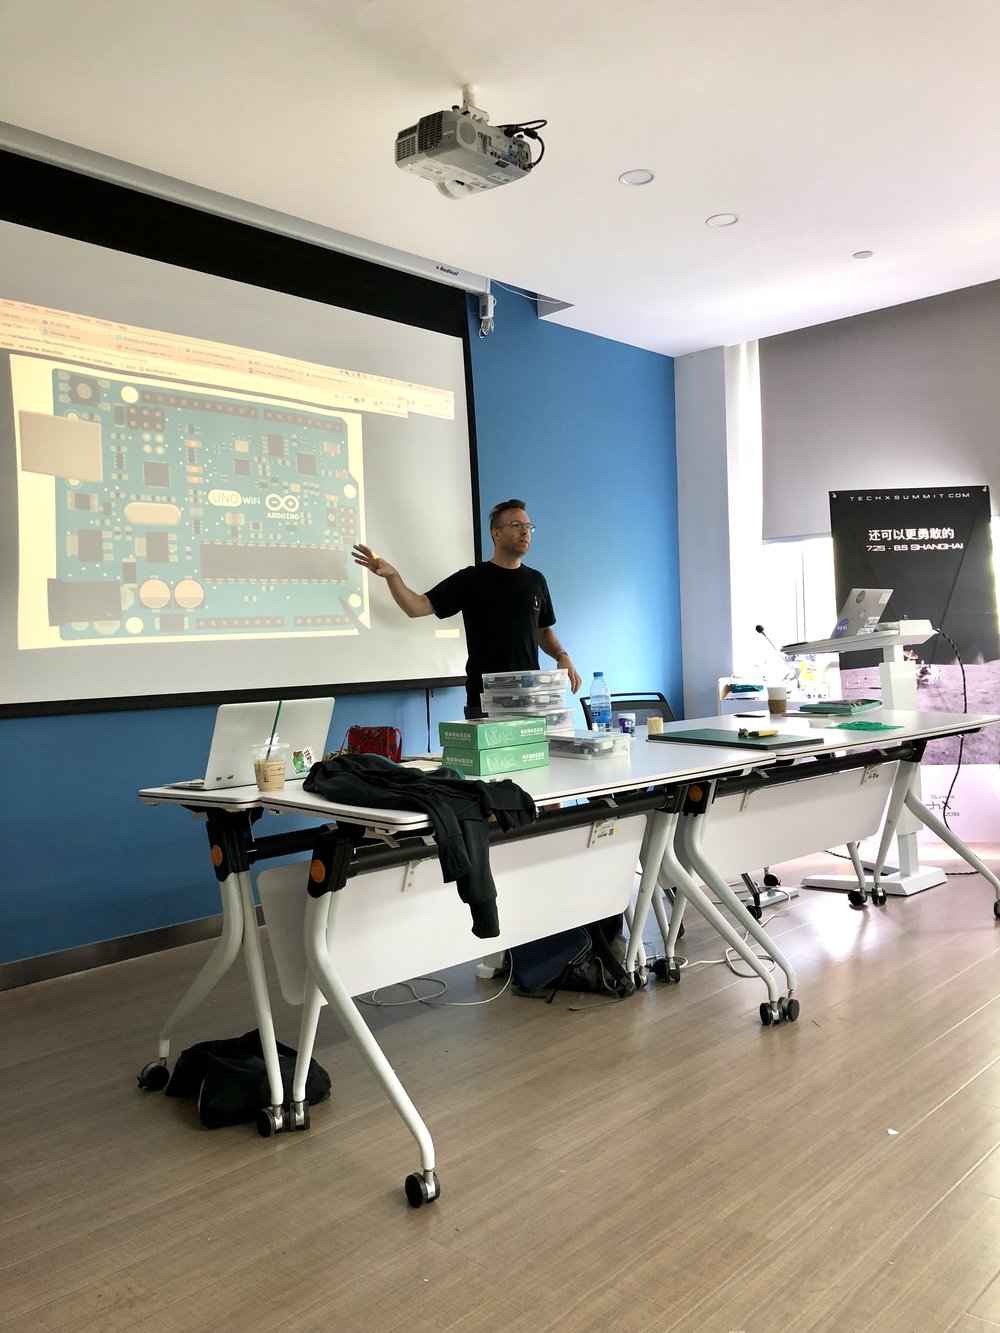 Sands teaching Introduction to Arduino